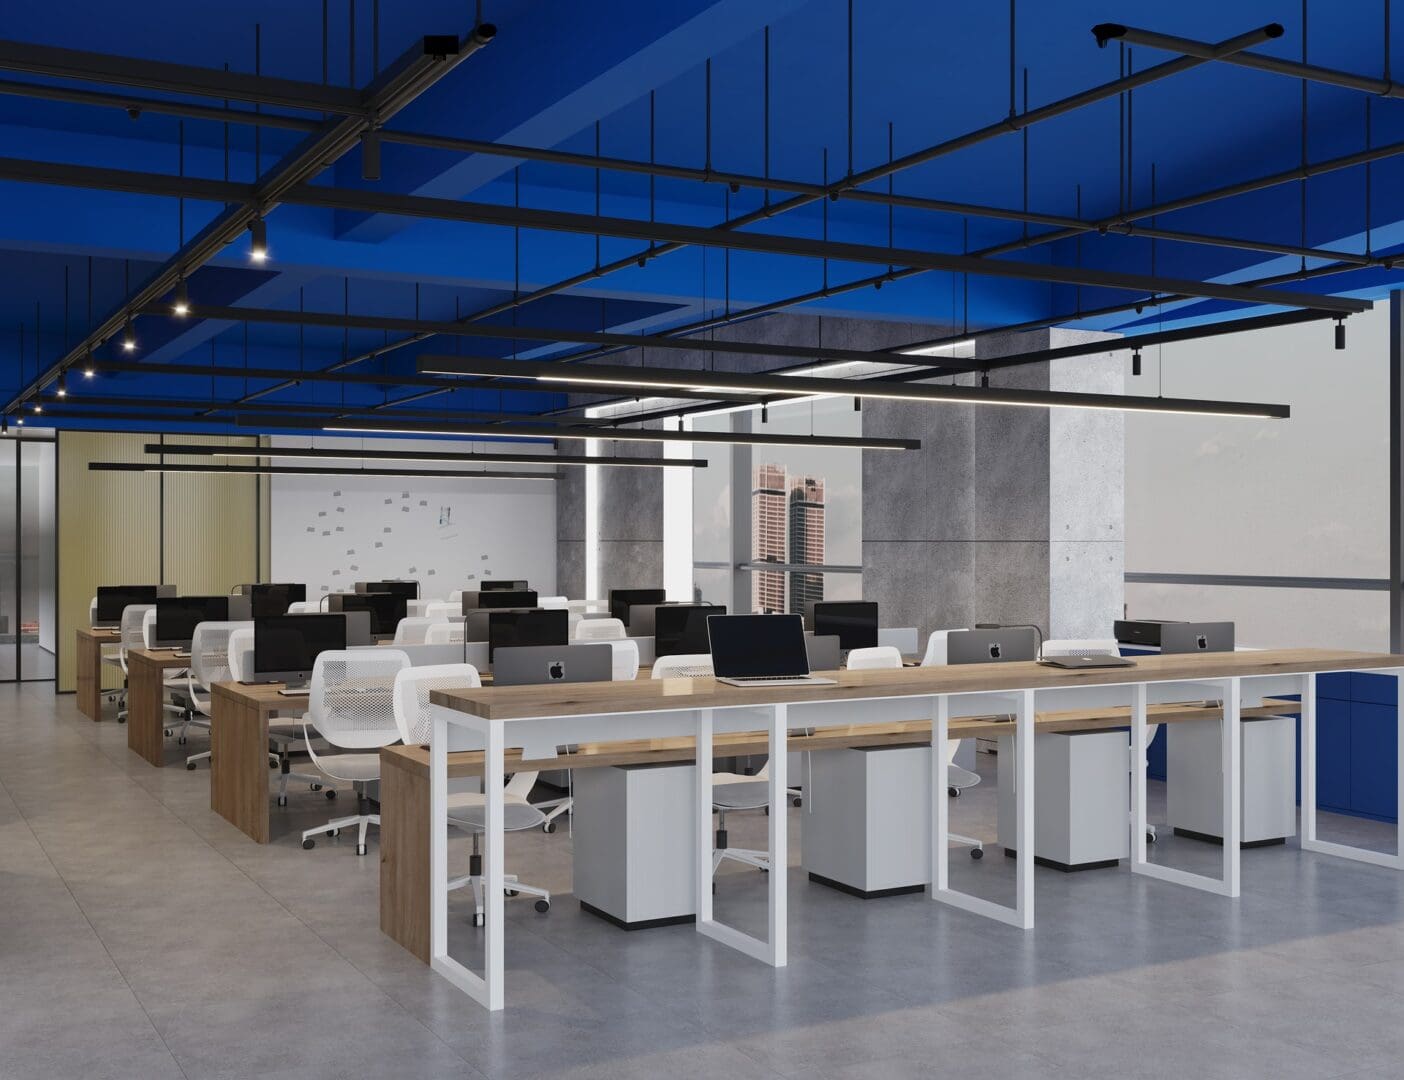 A large open office space with many desks.